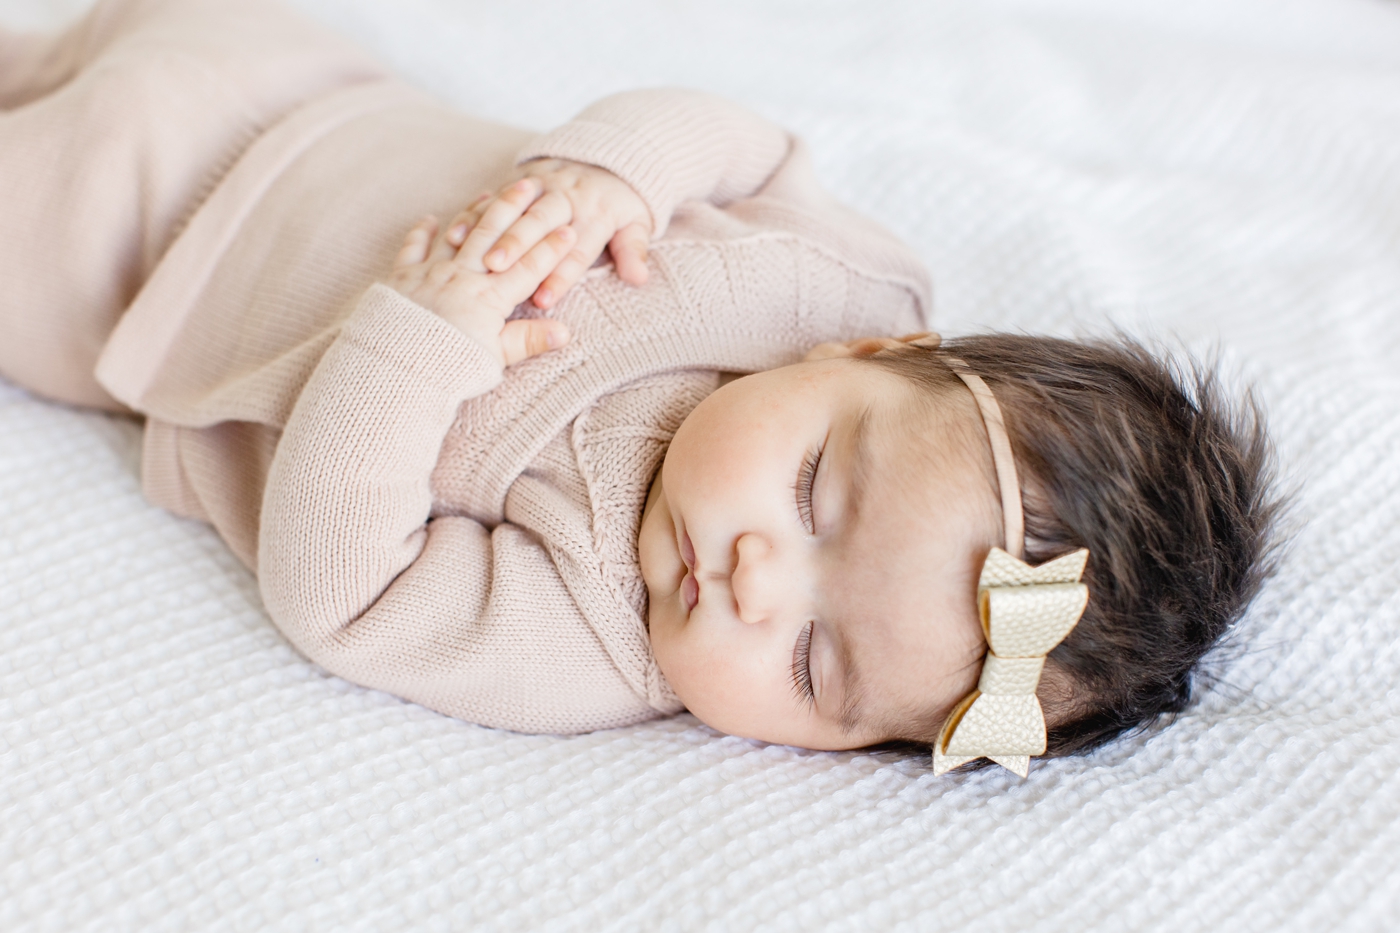 Baby sleeping with knit outfit and bow during photo session with Sana Ahmed Photography.